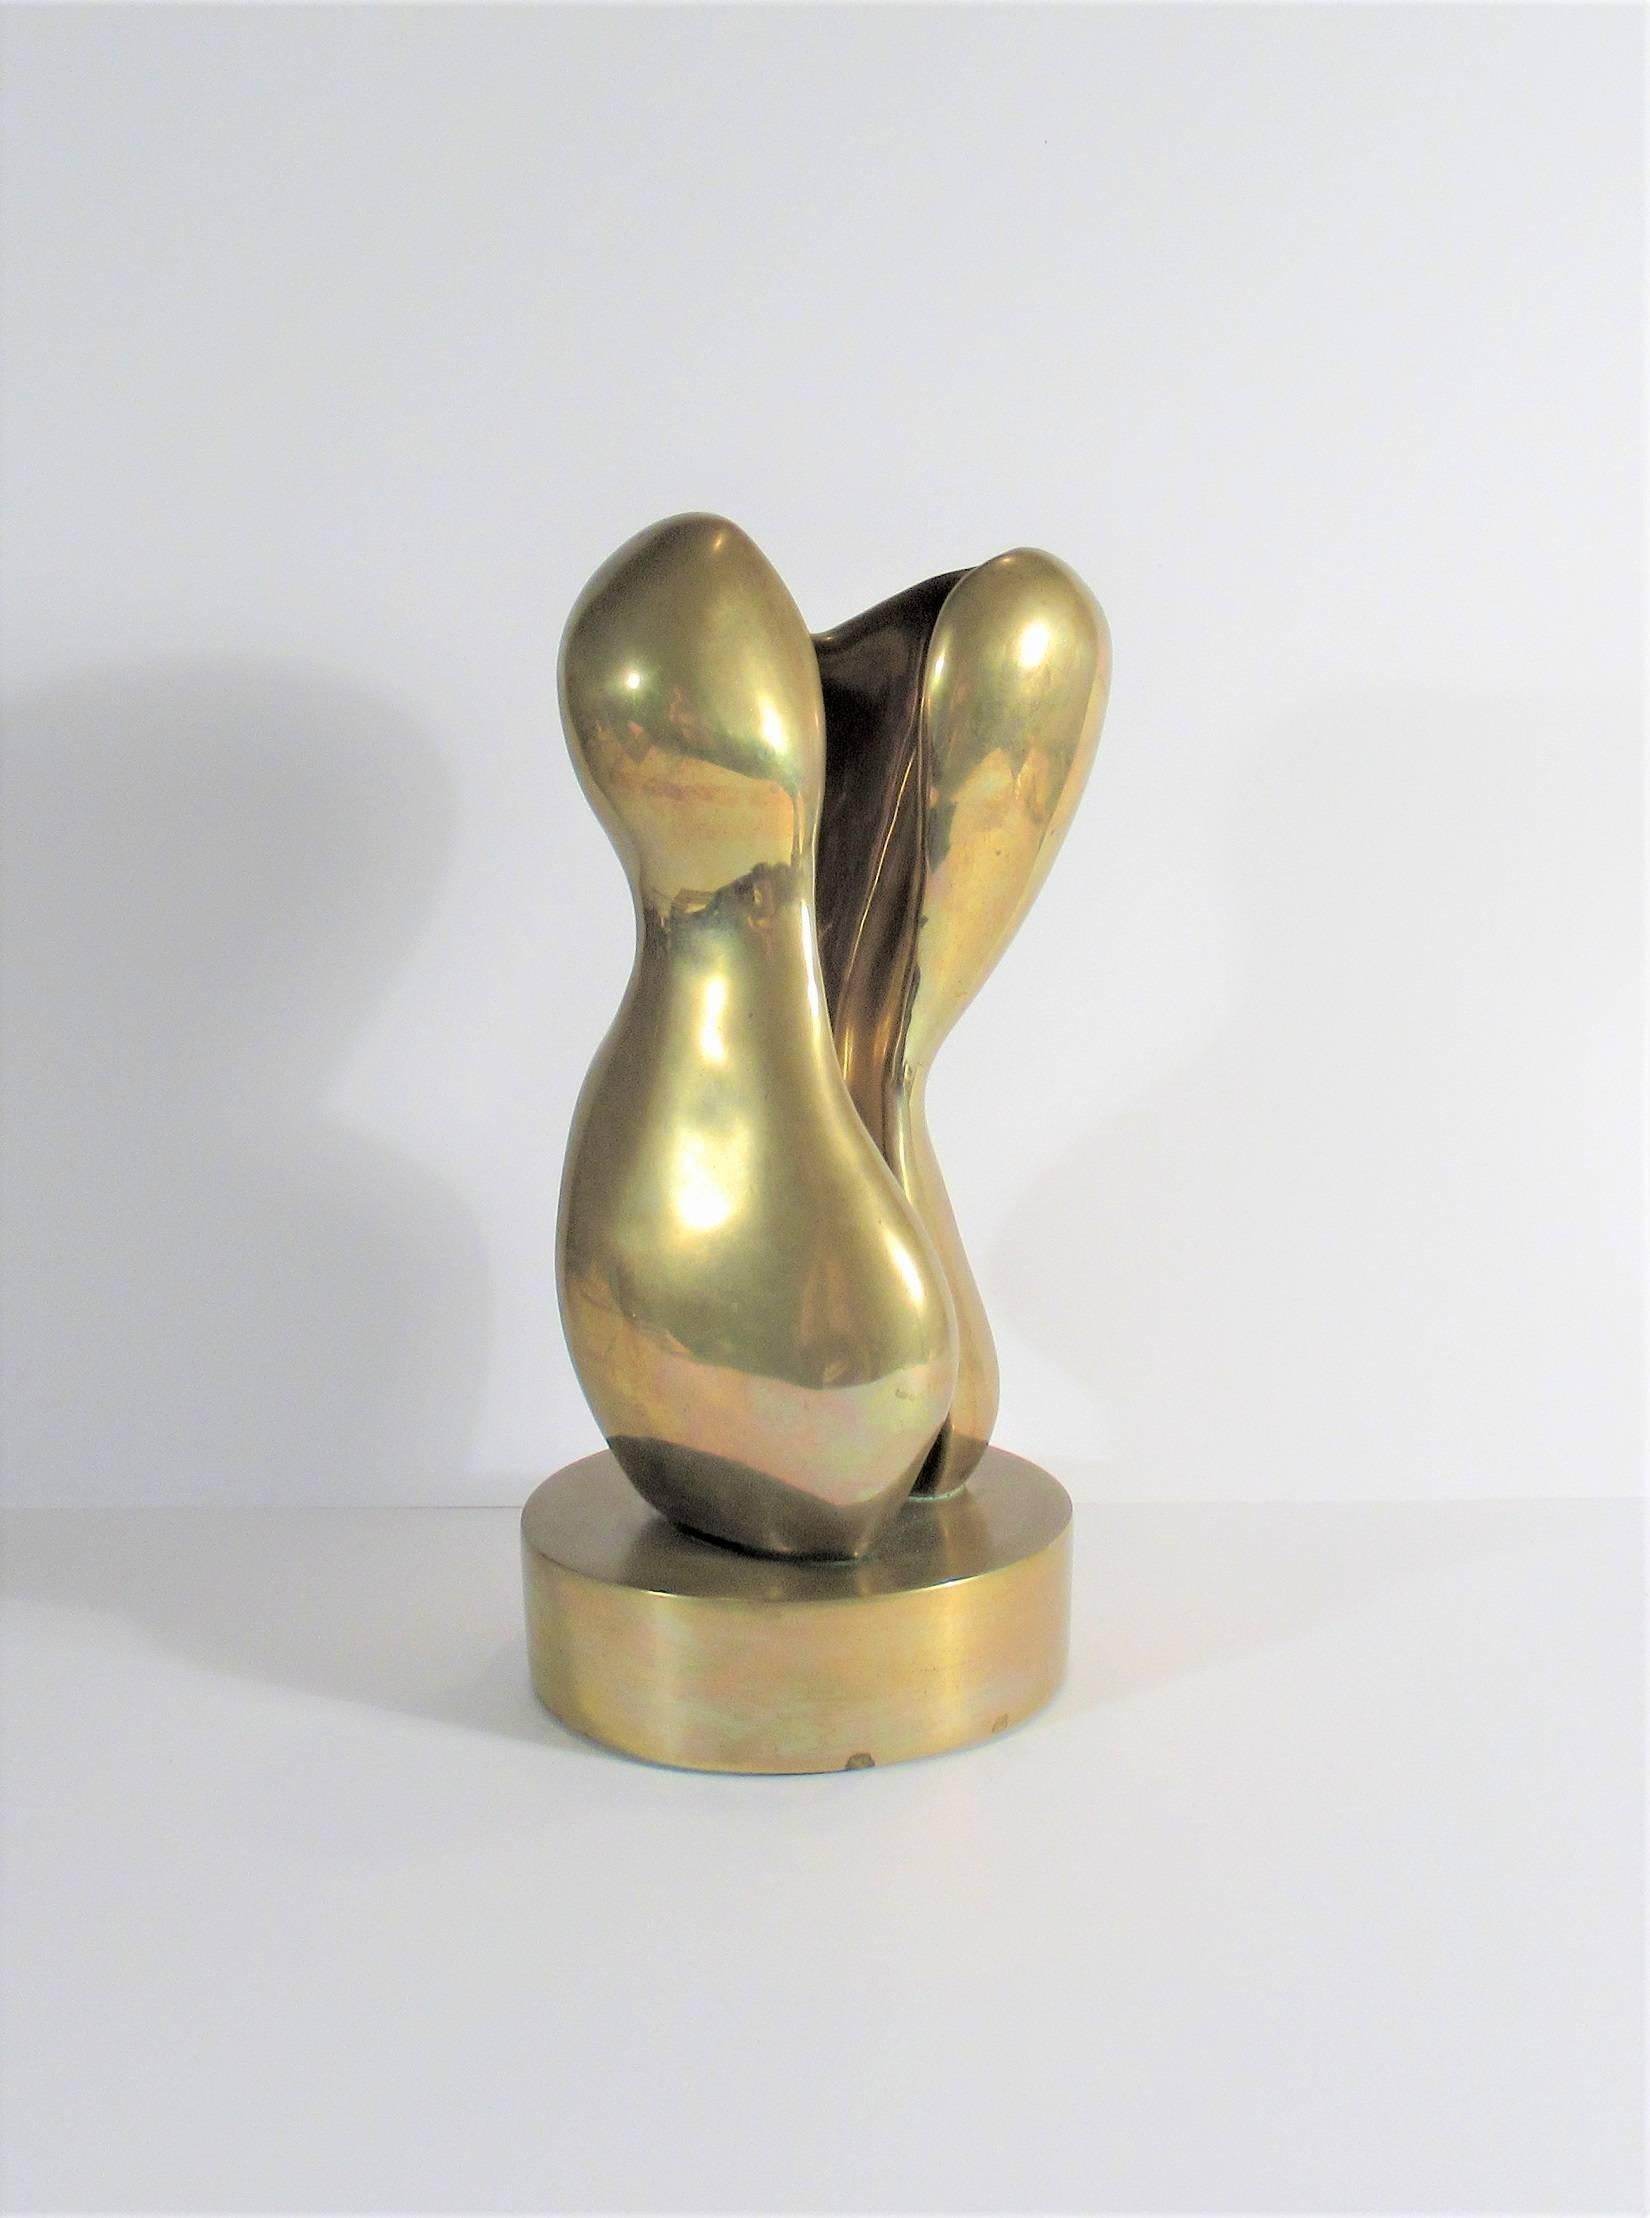 Untitled, Two Figures - Gold Nude Sculpture by Eli Karpel